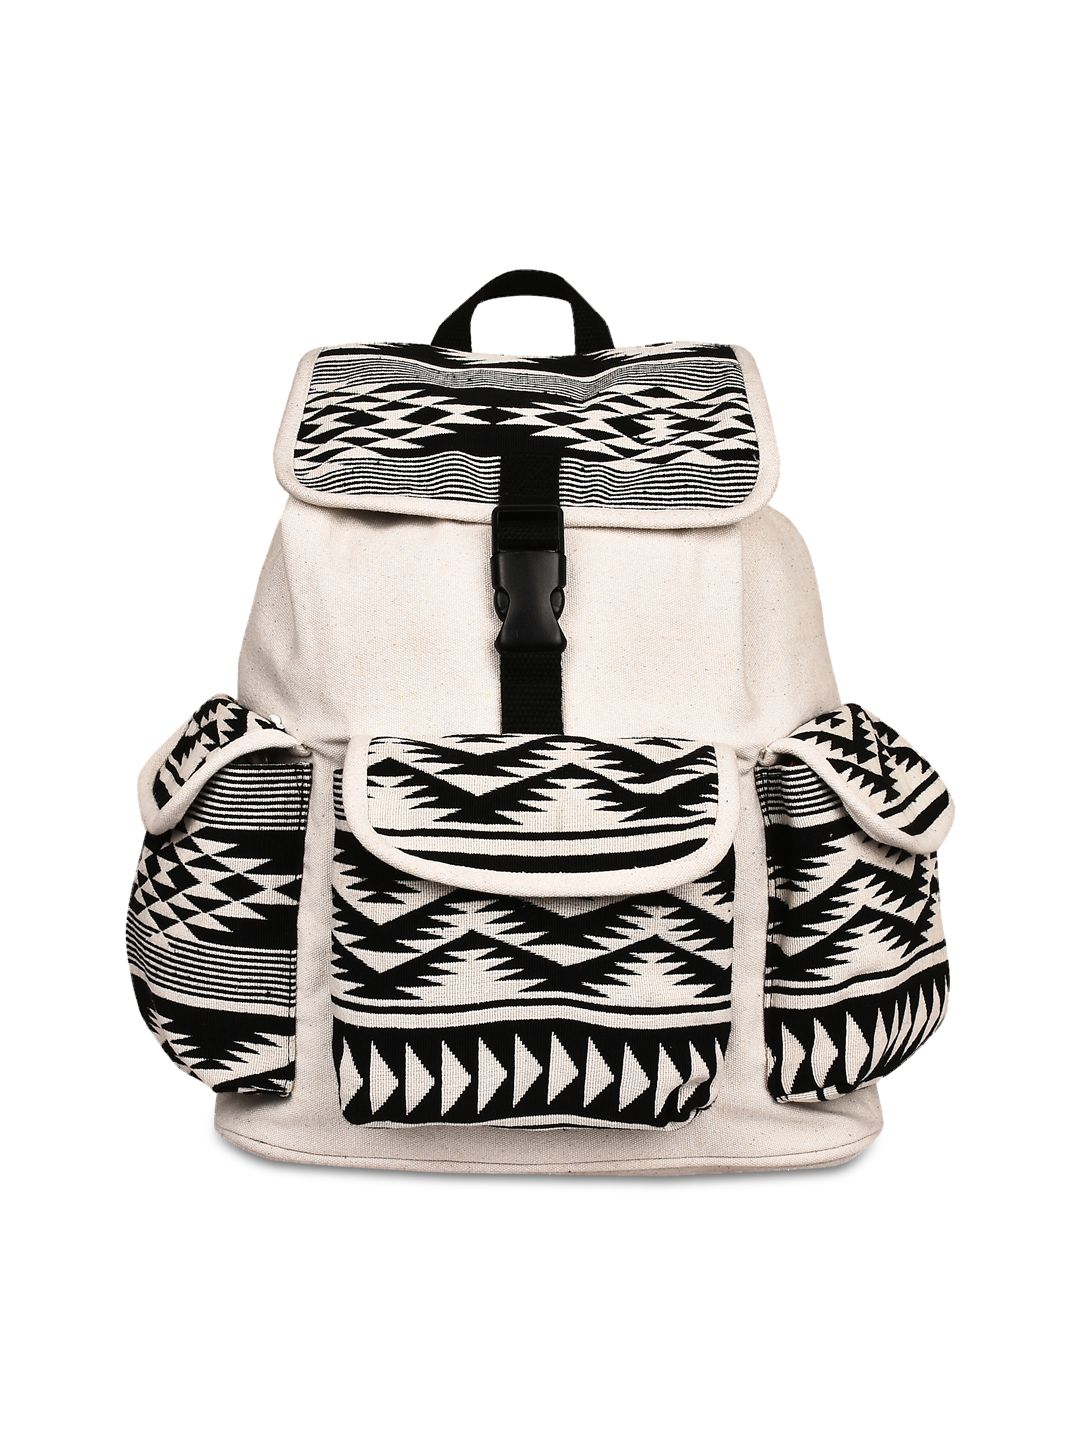 Anekaant Women White & Black Jacquard Backpack Price in India